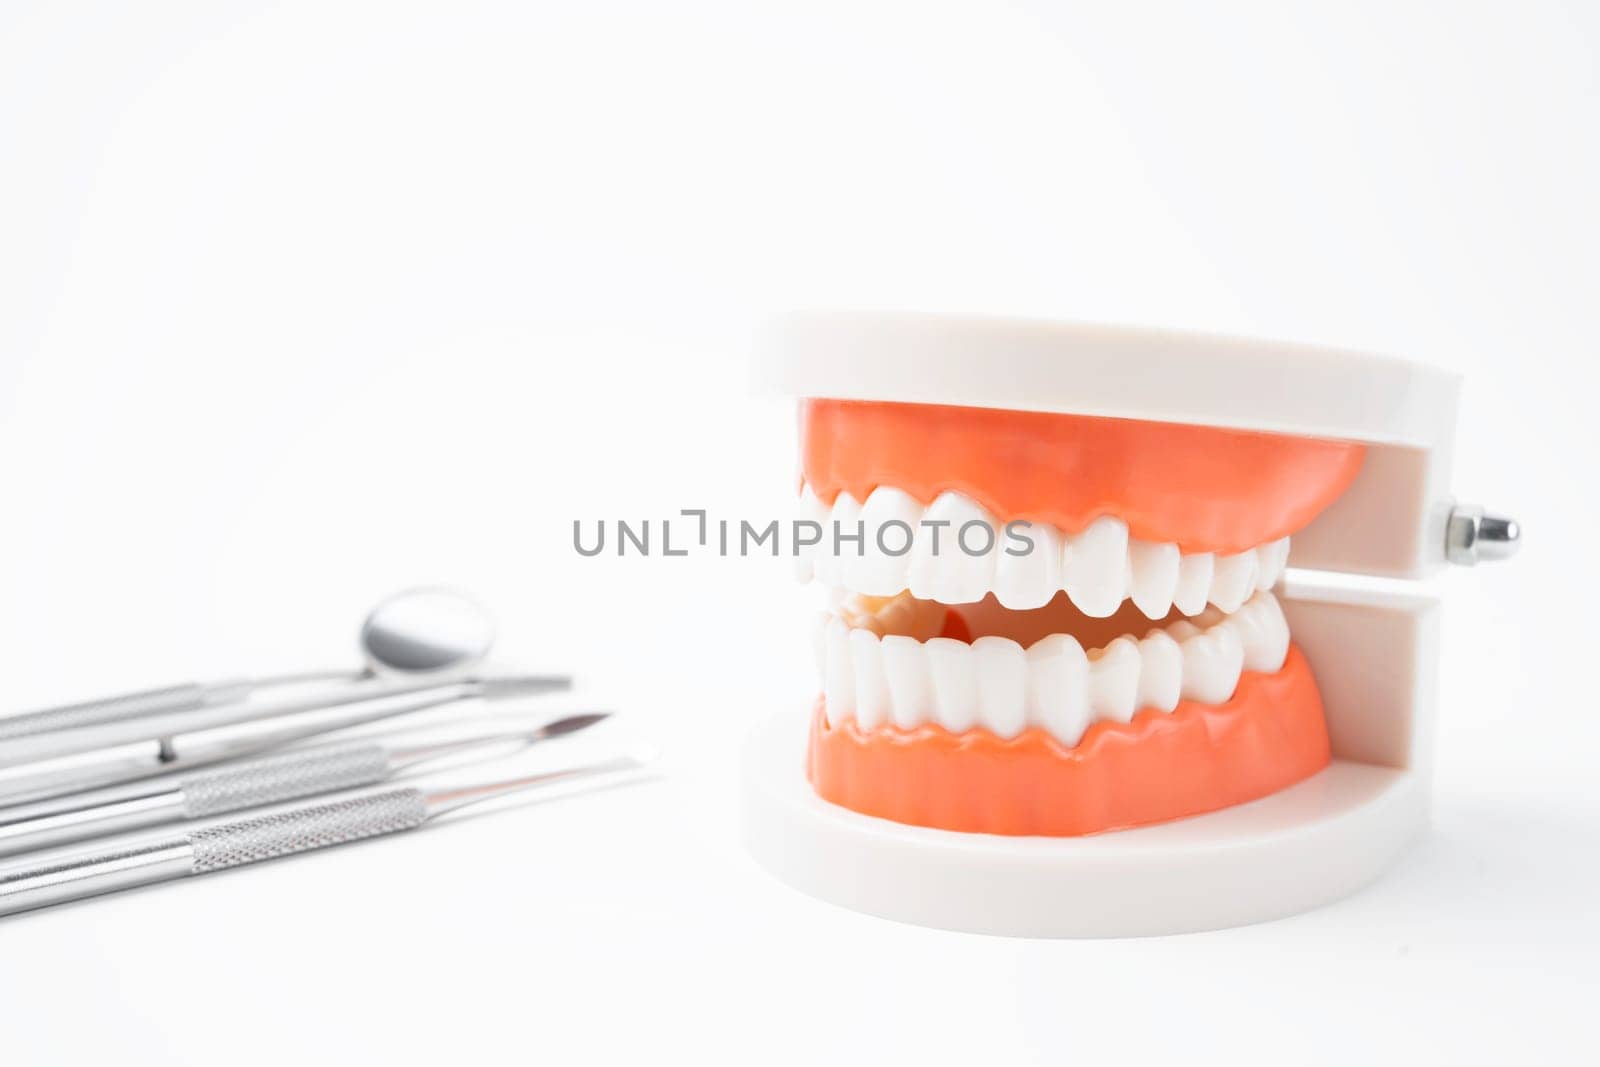 Anatomical teeth model and dental tools on white background.